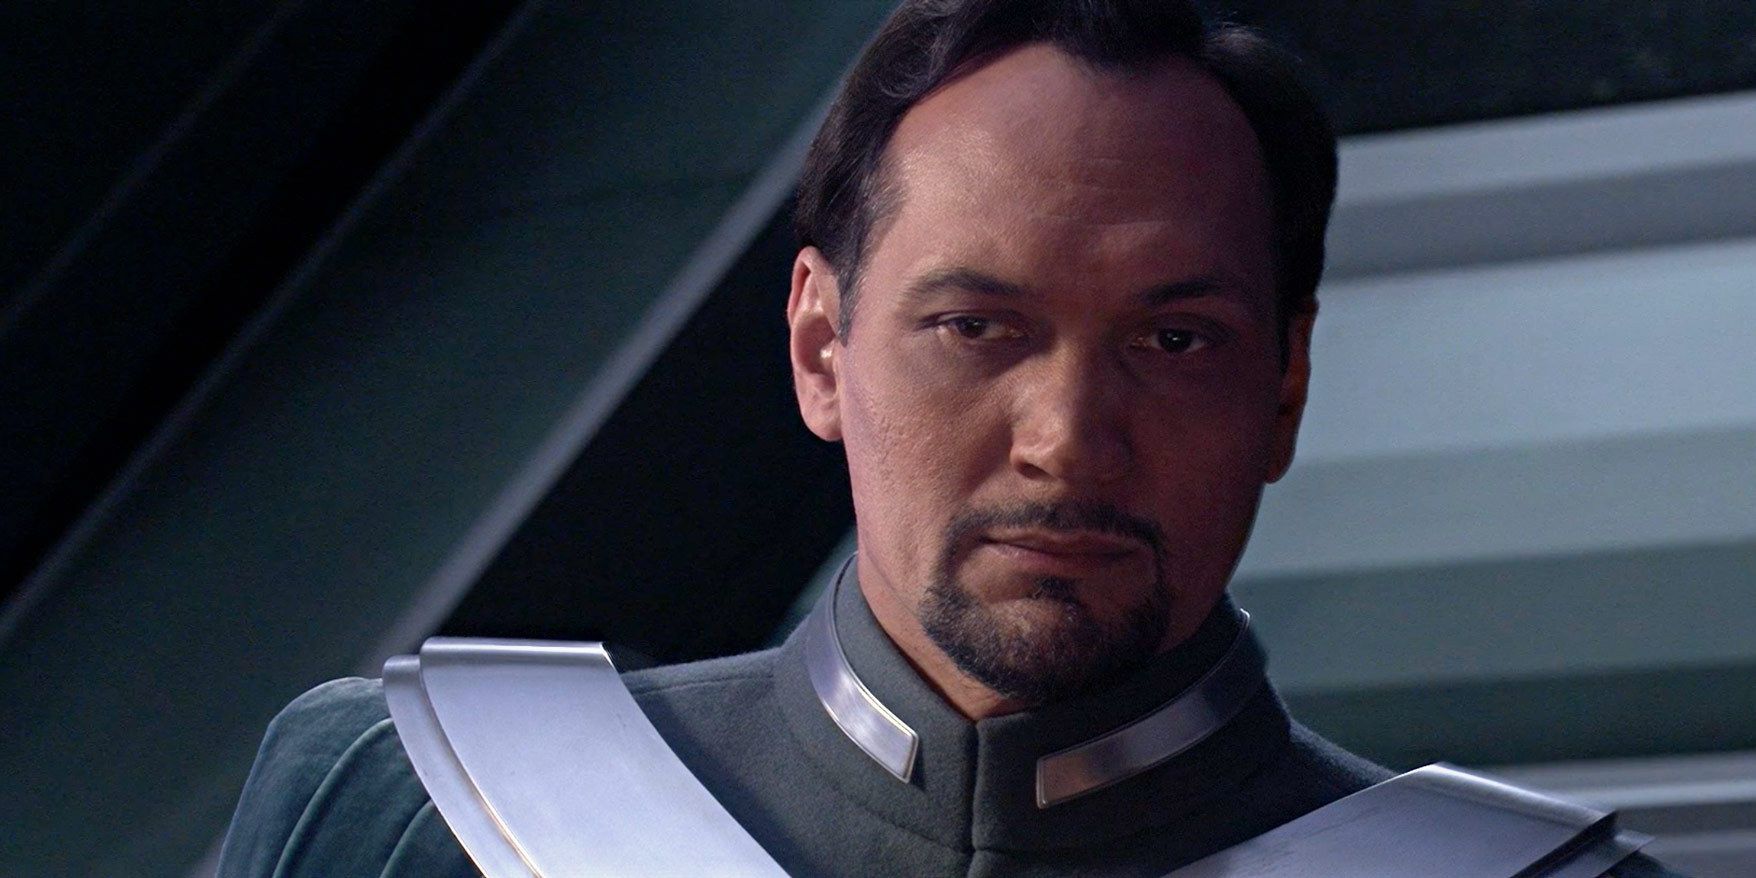 Jimmy Smits as Bail Organa watches as Palpatine dons himself Emperor Star Wars Revenge of the Sith